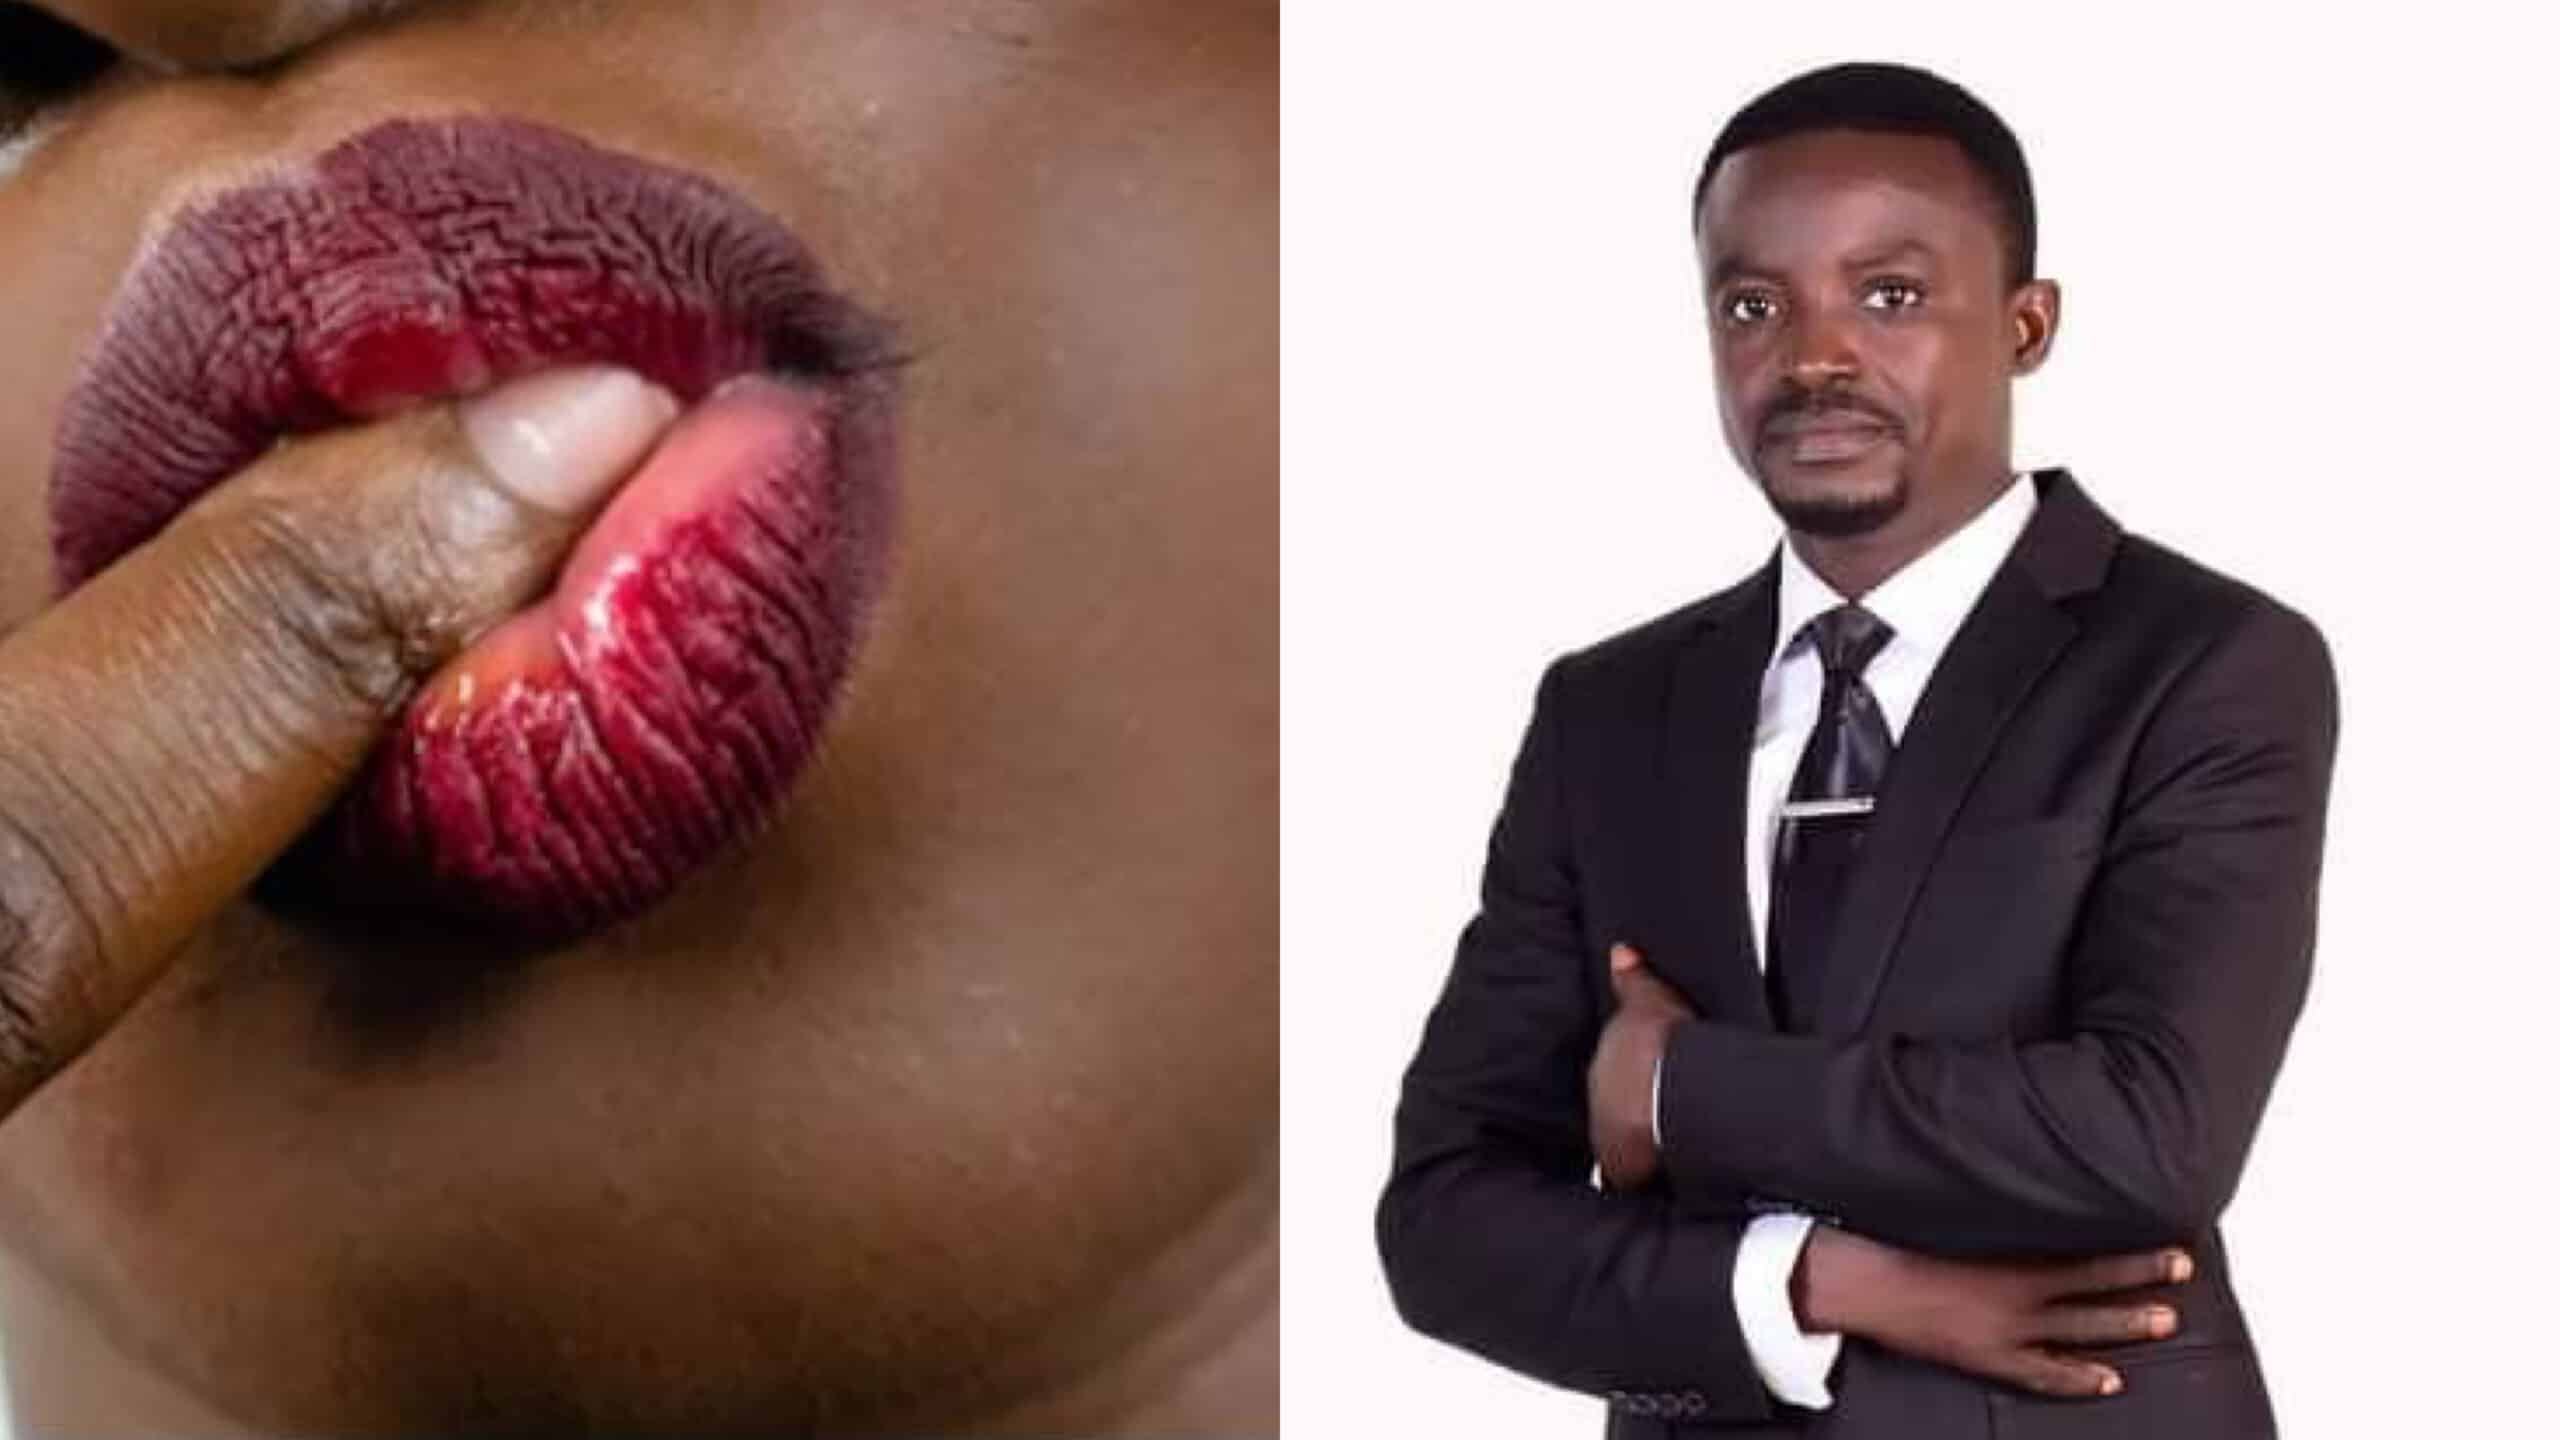 "It is demonic to allow someone to lick your private parts" - Pastor warns